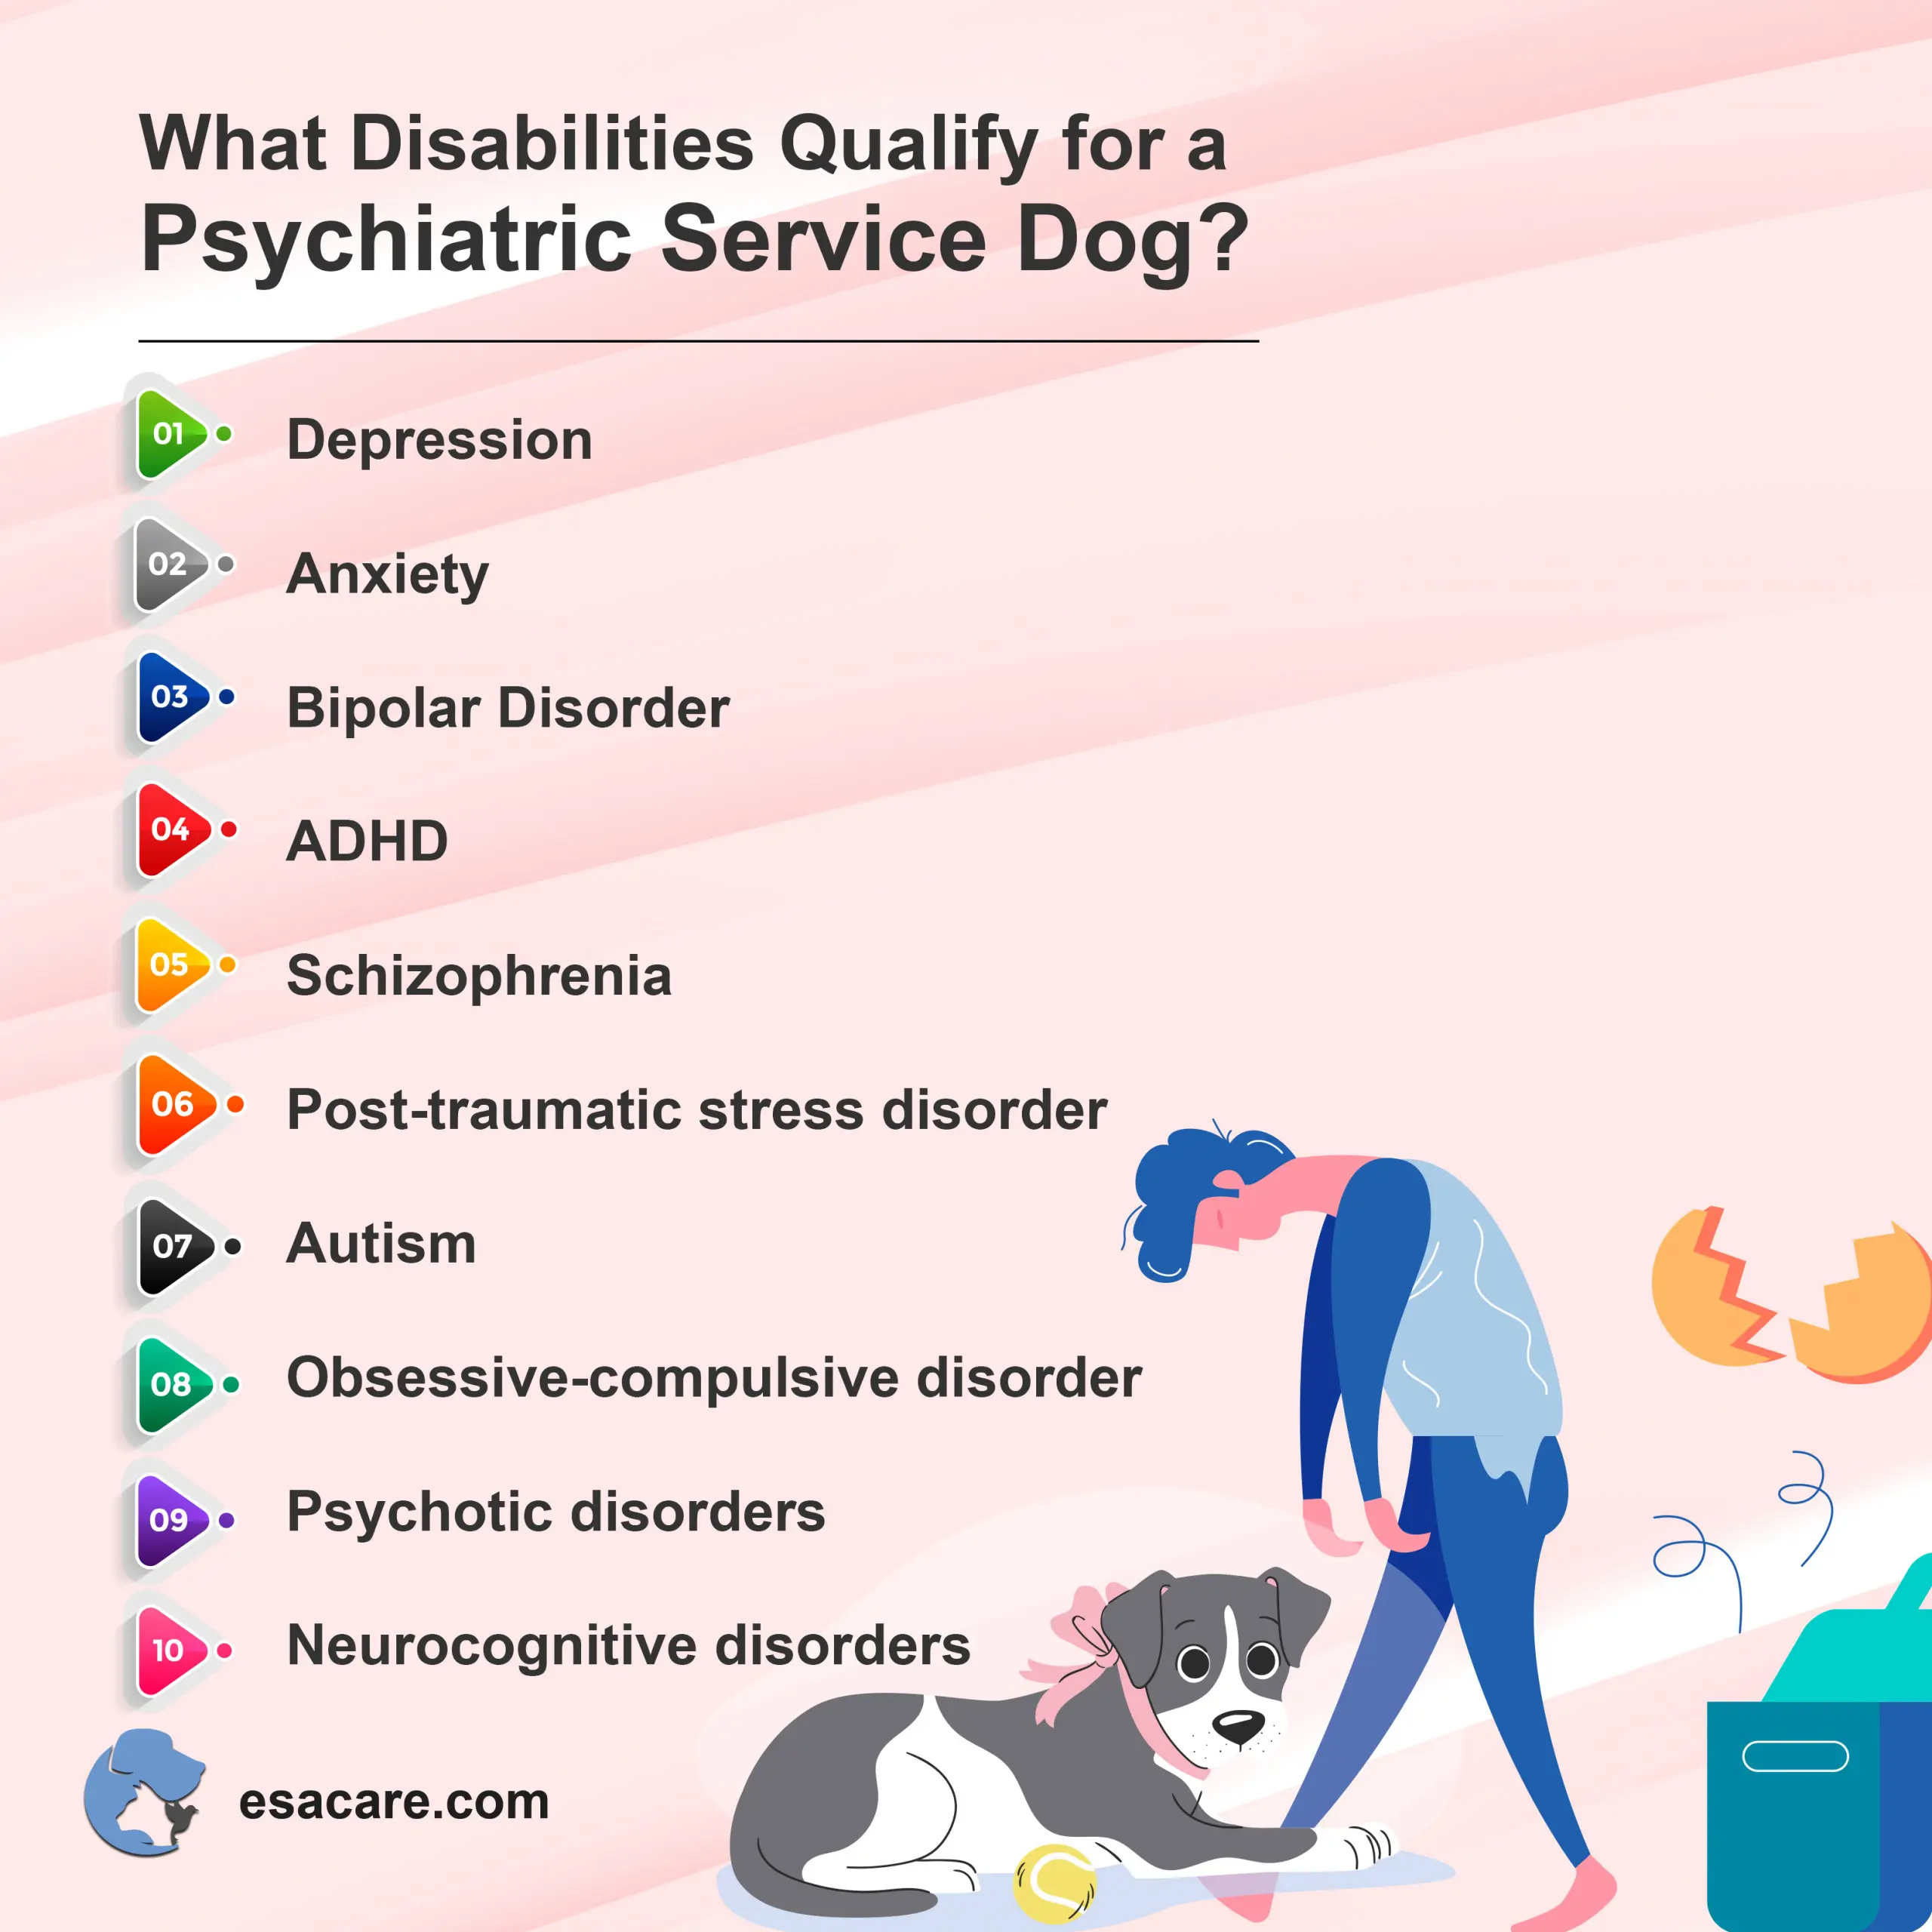 https://esacare.com/wp-content/uploads/2022/01/esacare_10-Crucial-Benefits-of-Psychiatric-Service-Dogs-in-our-Lives_image_1-scaled.jpg.webp